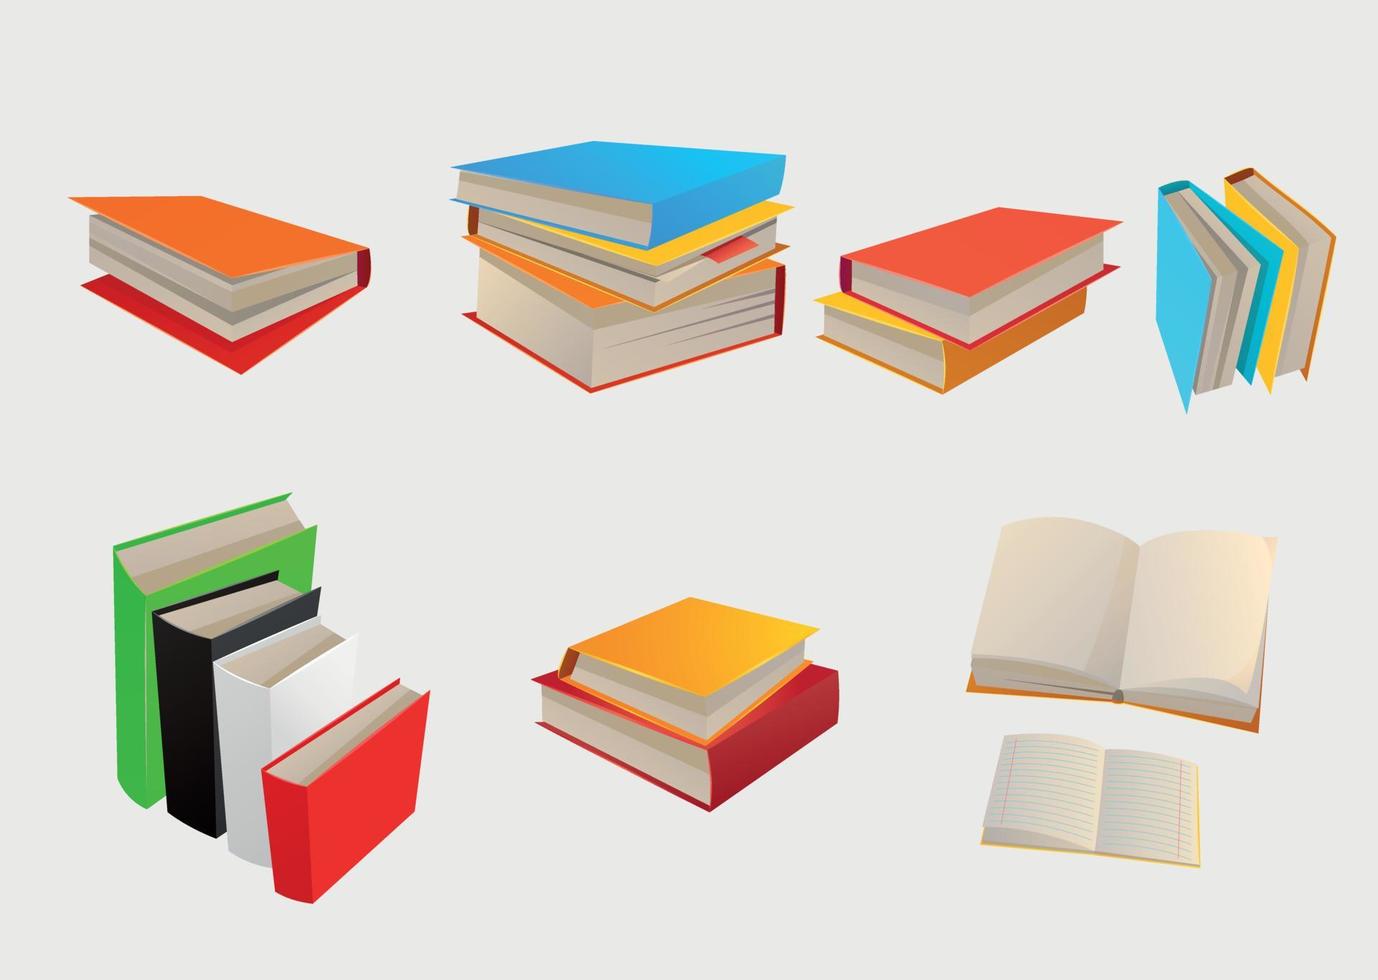 Collection of books, pile of books, notebooks. Reading, learn and receive education through books. Read more books. School educational vector illustration